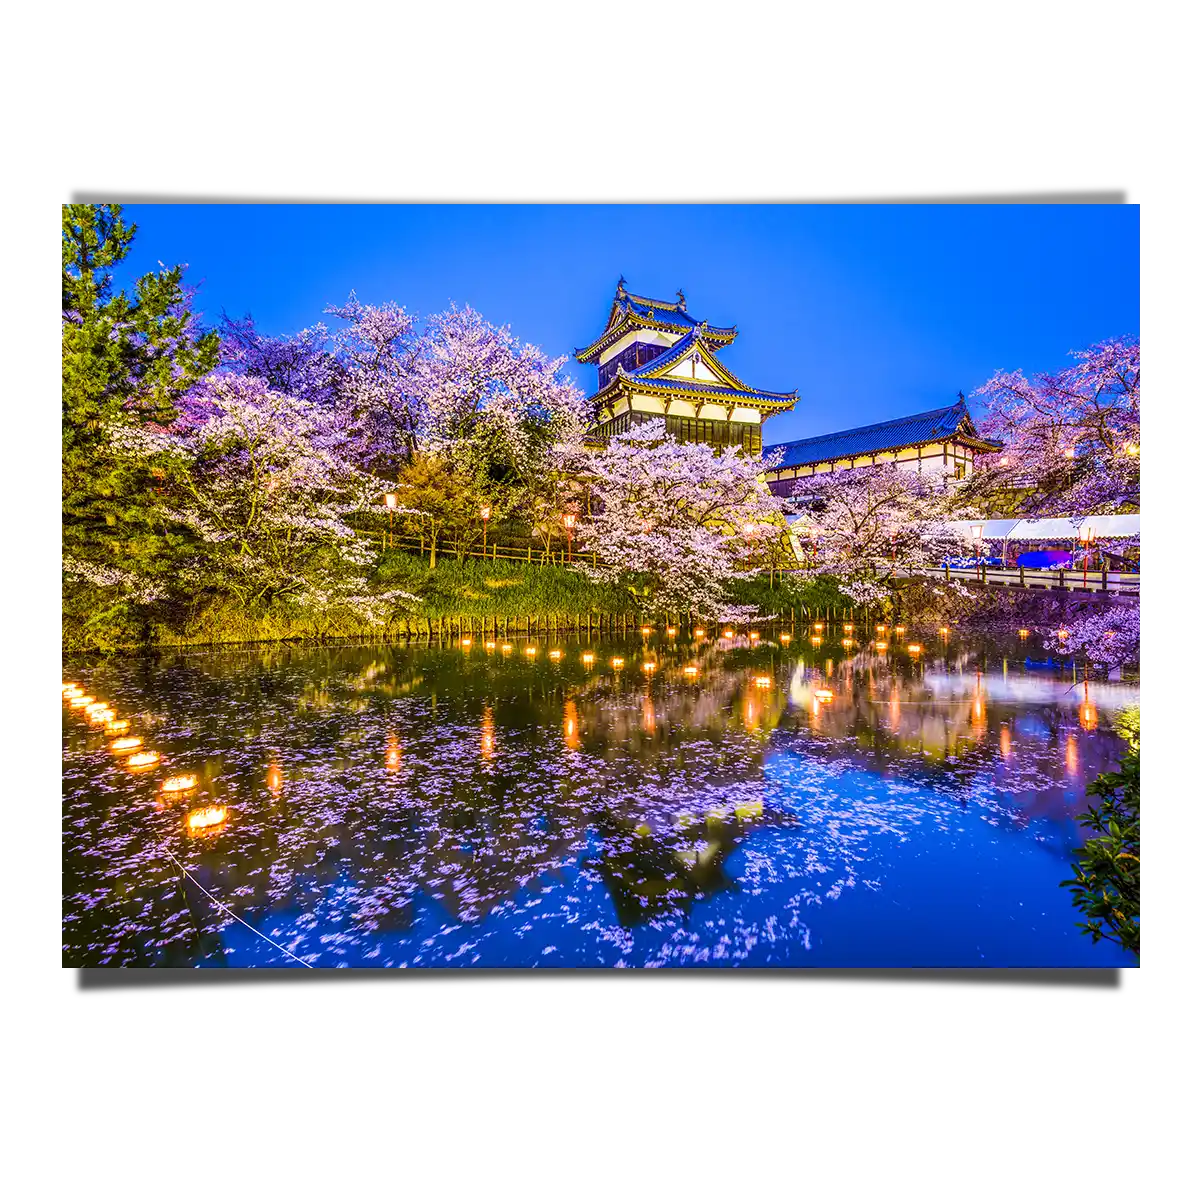 Koriyama Castle in Bright Cherry Blossom Trees Reflecting in Waters Nara-japan-castle